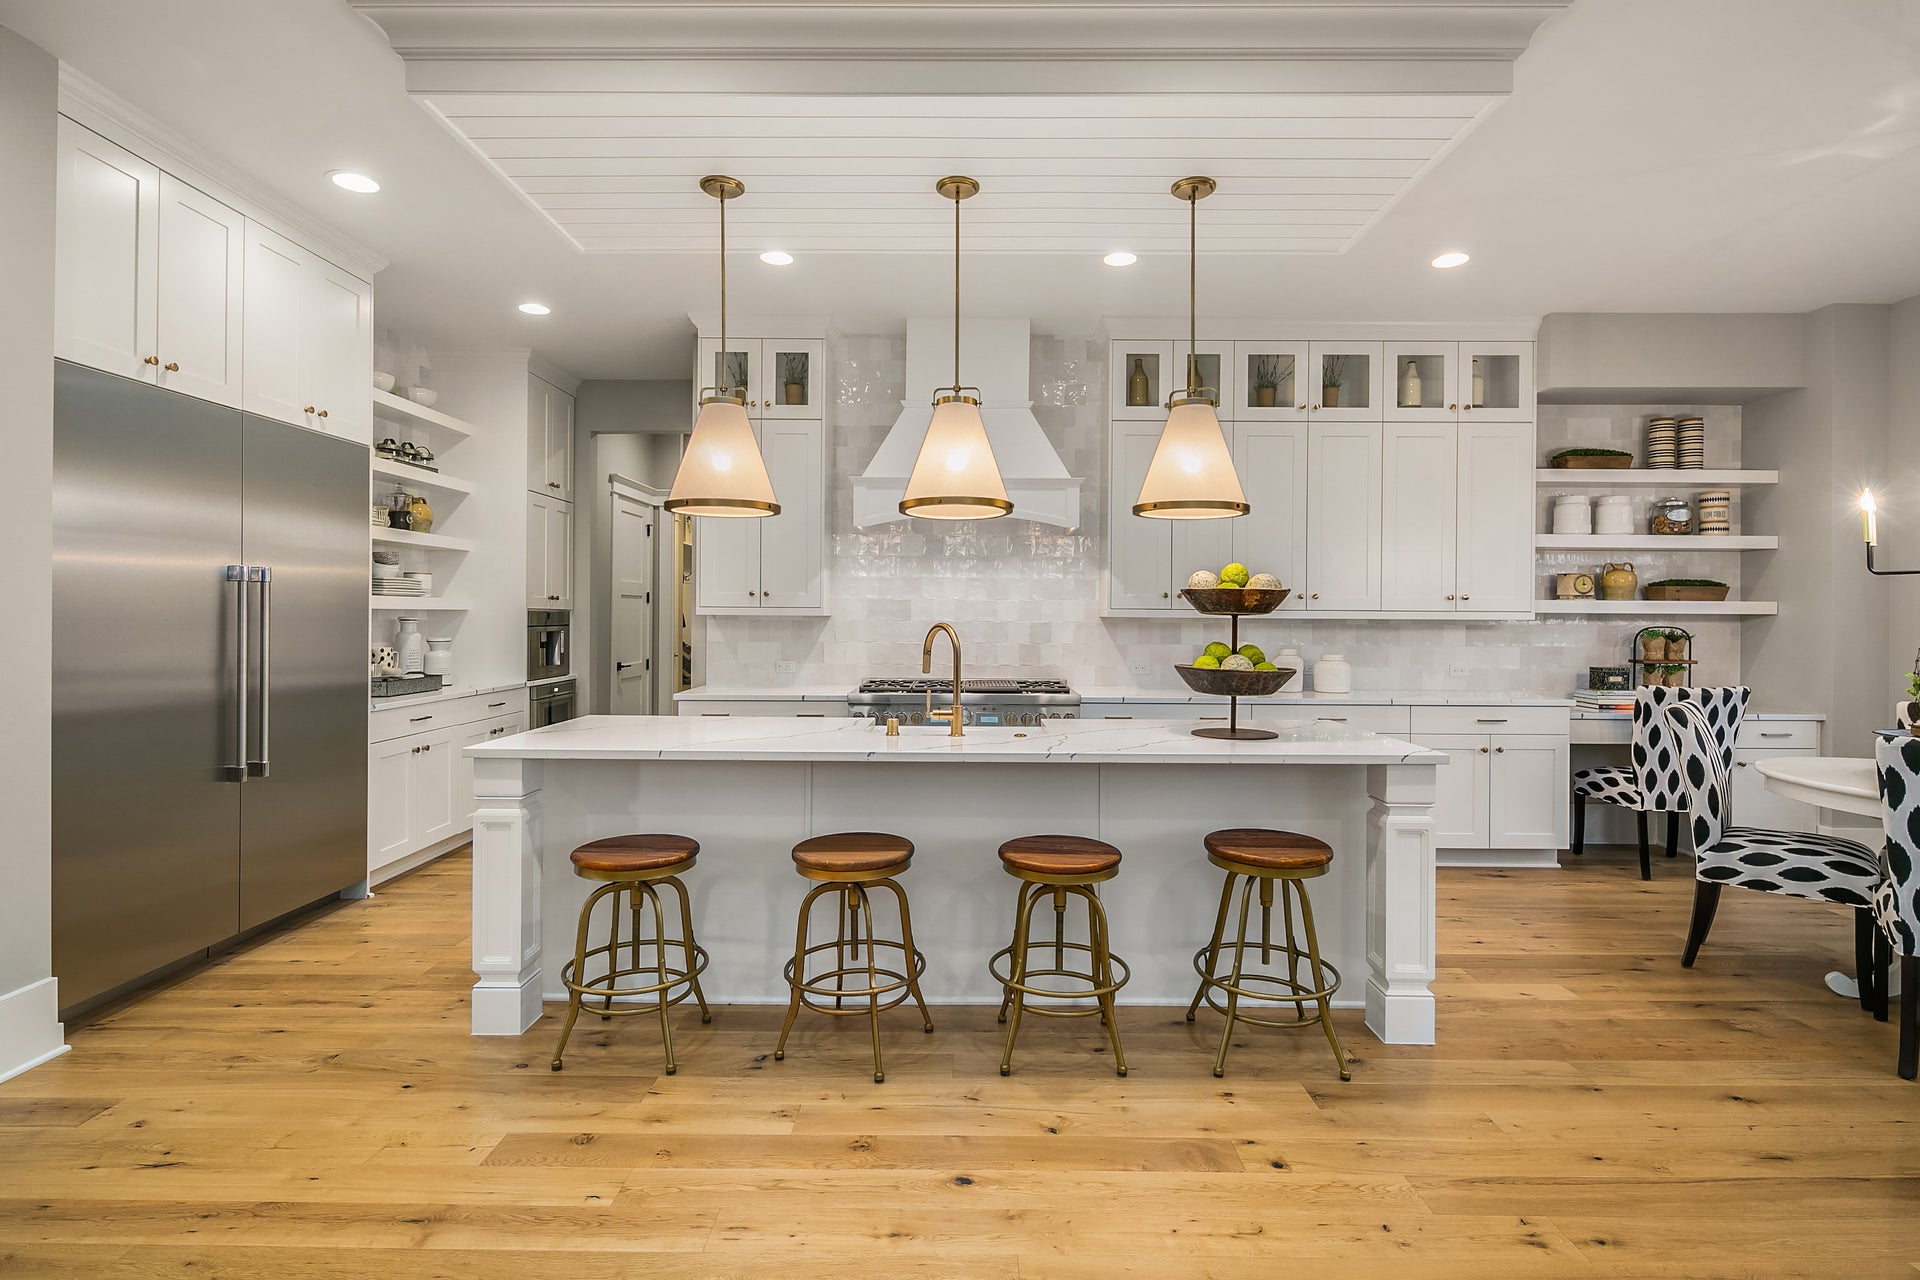 Large kitchen with an oversized island, white cabinets and a white hooded range.